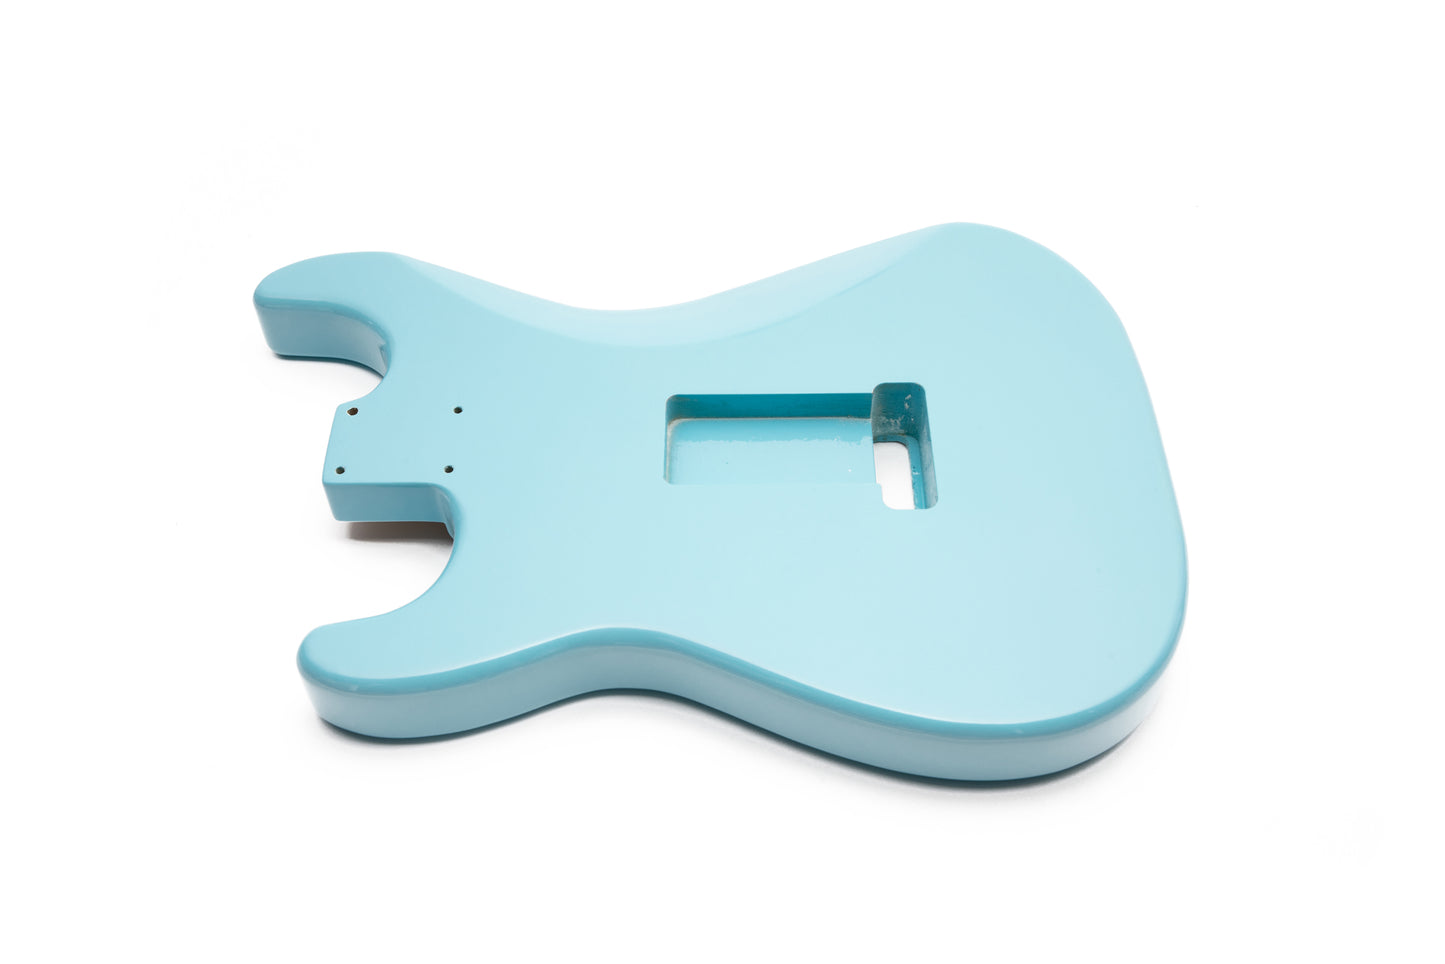 AE Guitars® S-Style Paulownia Replacement Guitar Body Sonic Blue